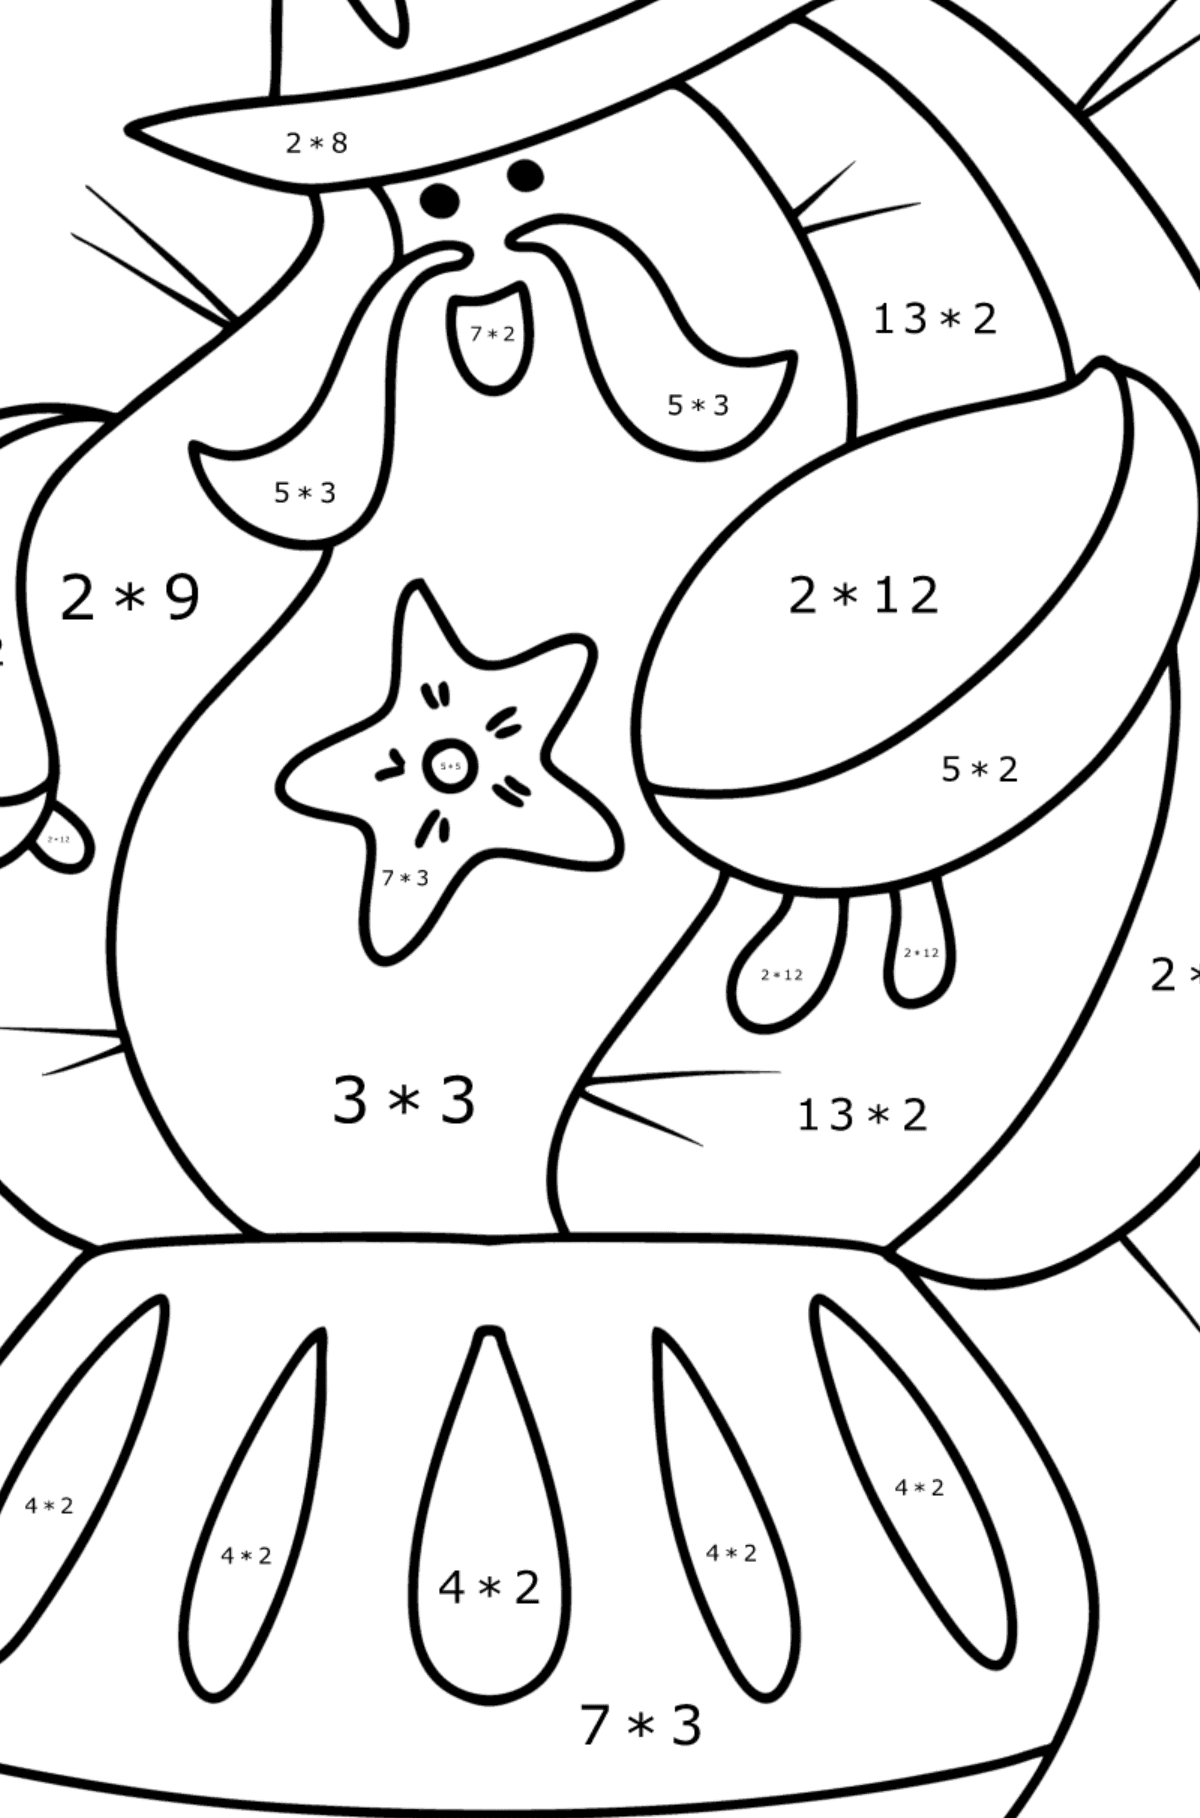 Sheriff Cactus coloring page - Math Coloring - Multiplication for Kids